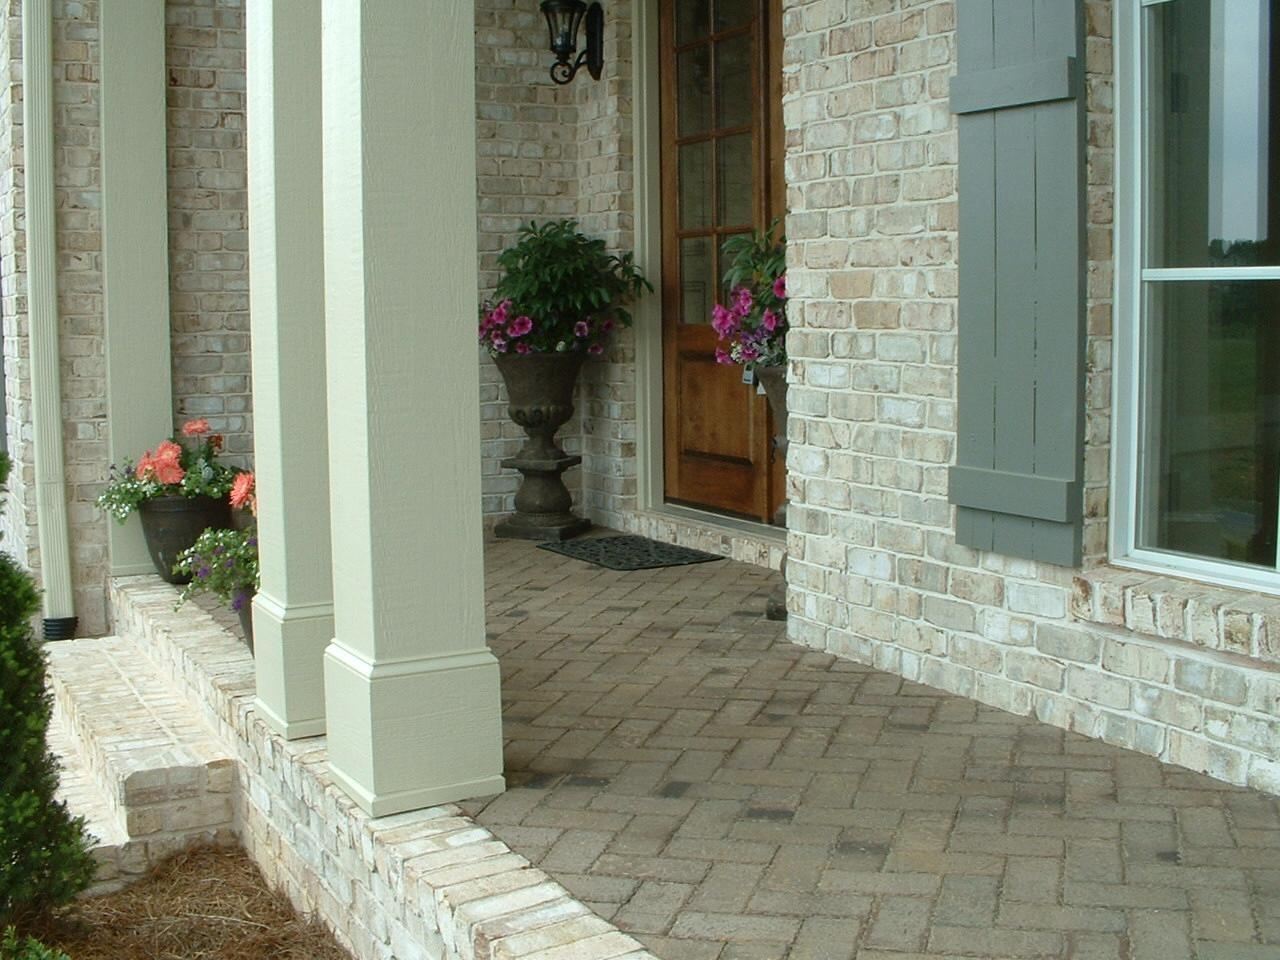 Image of a fully bricked porch with decorative plants and wooden columns